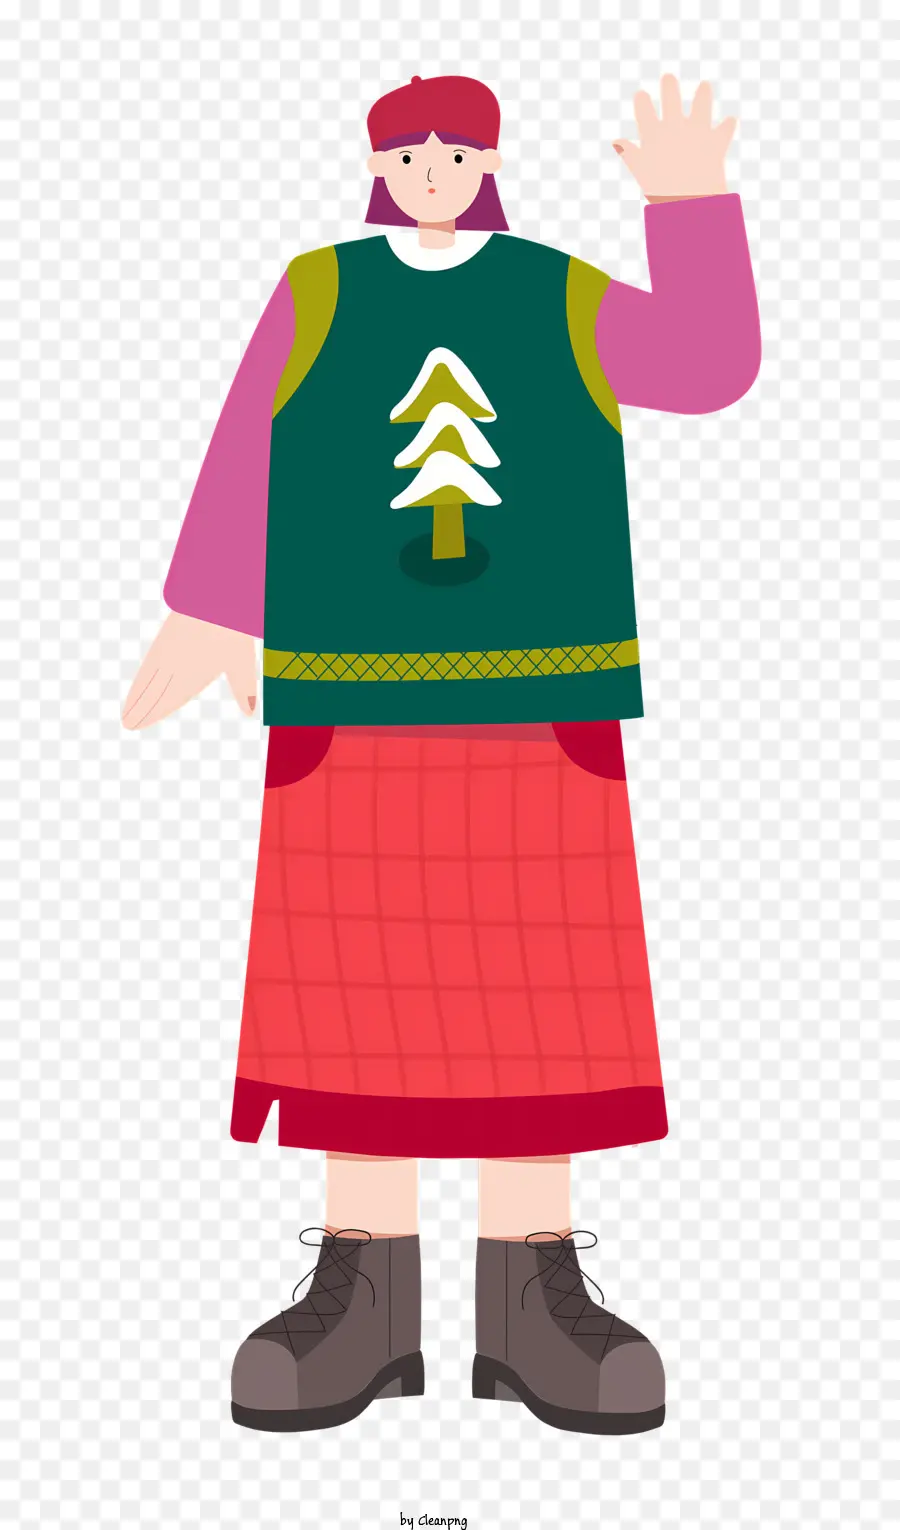 plaid skirt green sweater woman hands on hips red scarf